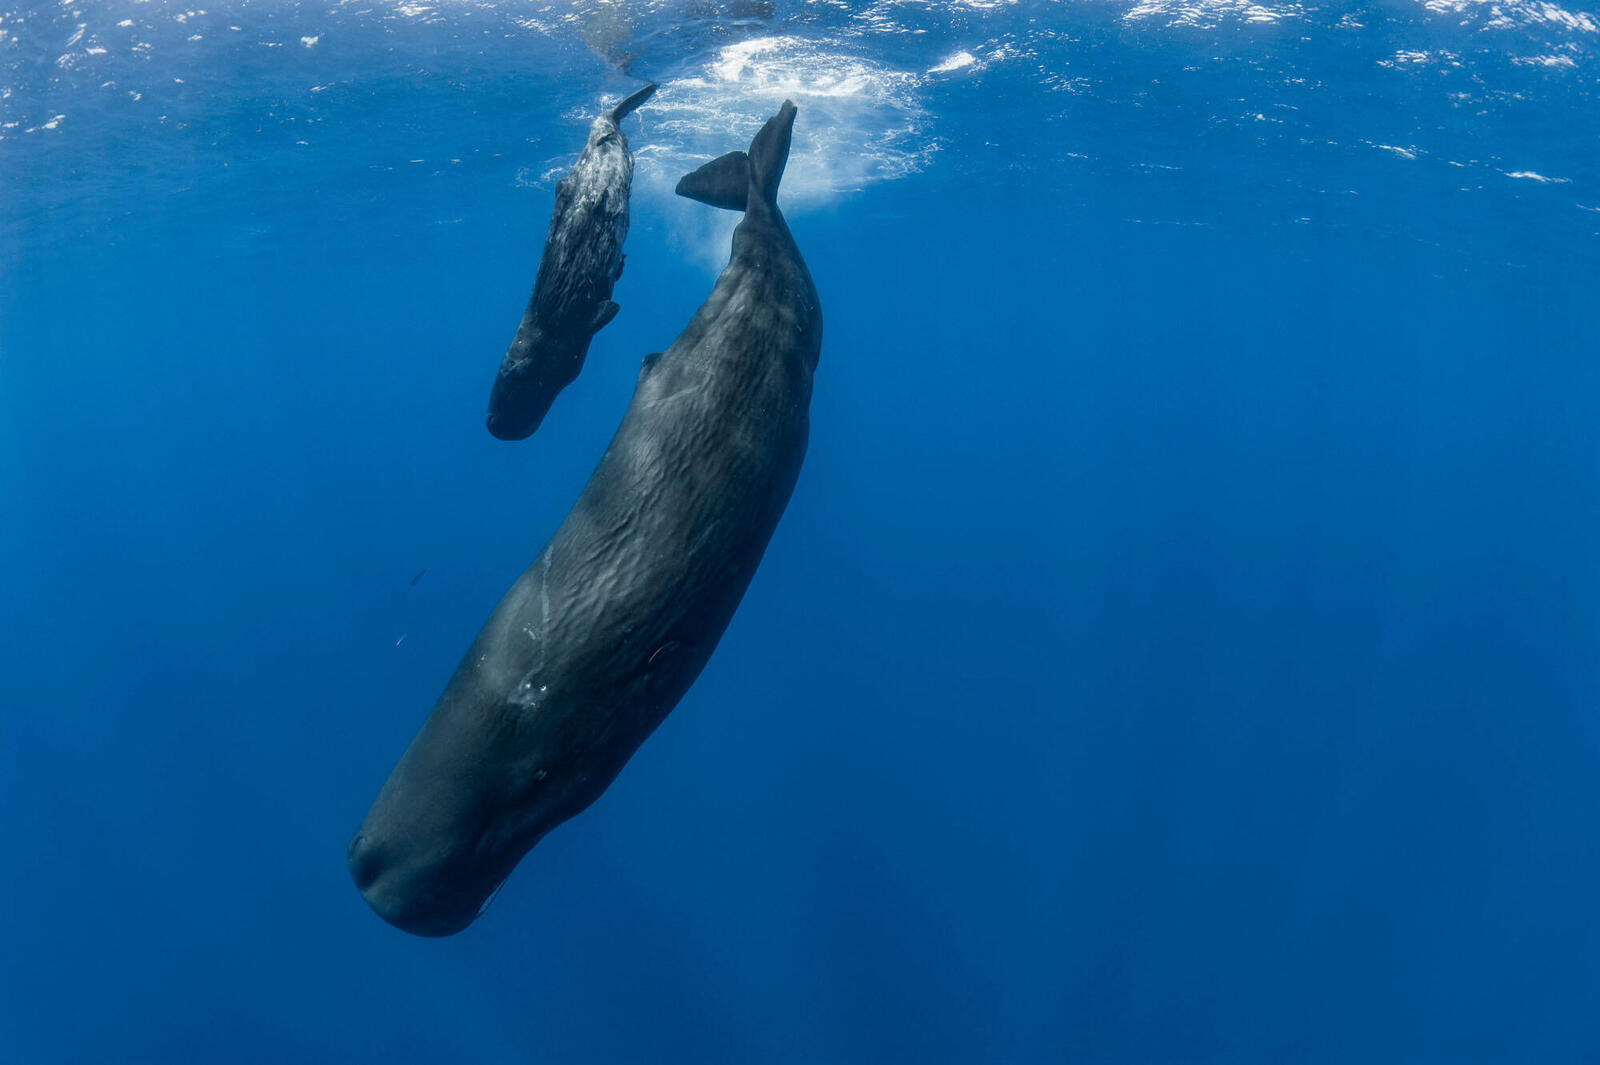 This fishing gear can help save whales. What will it take for